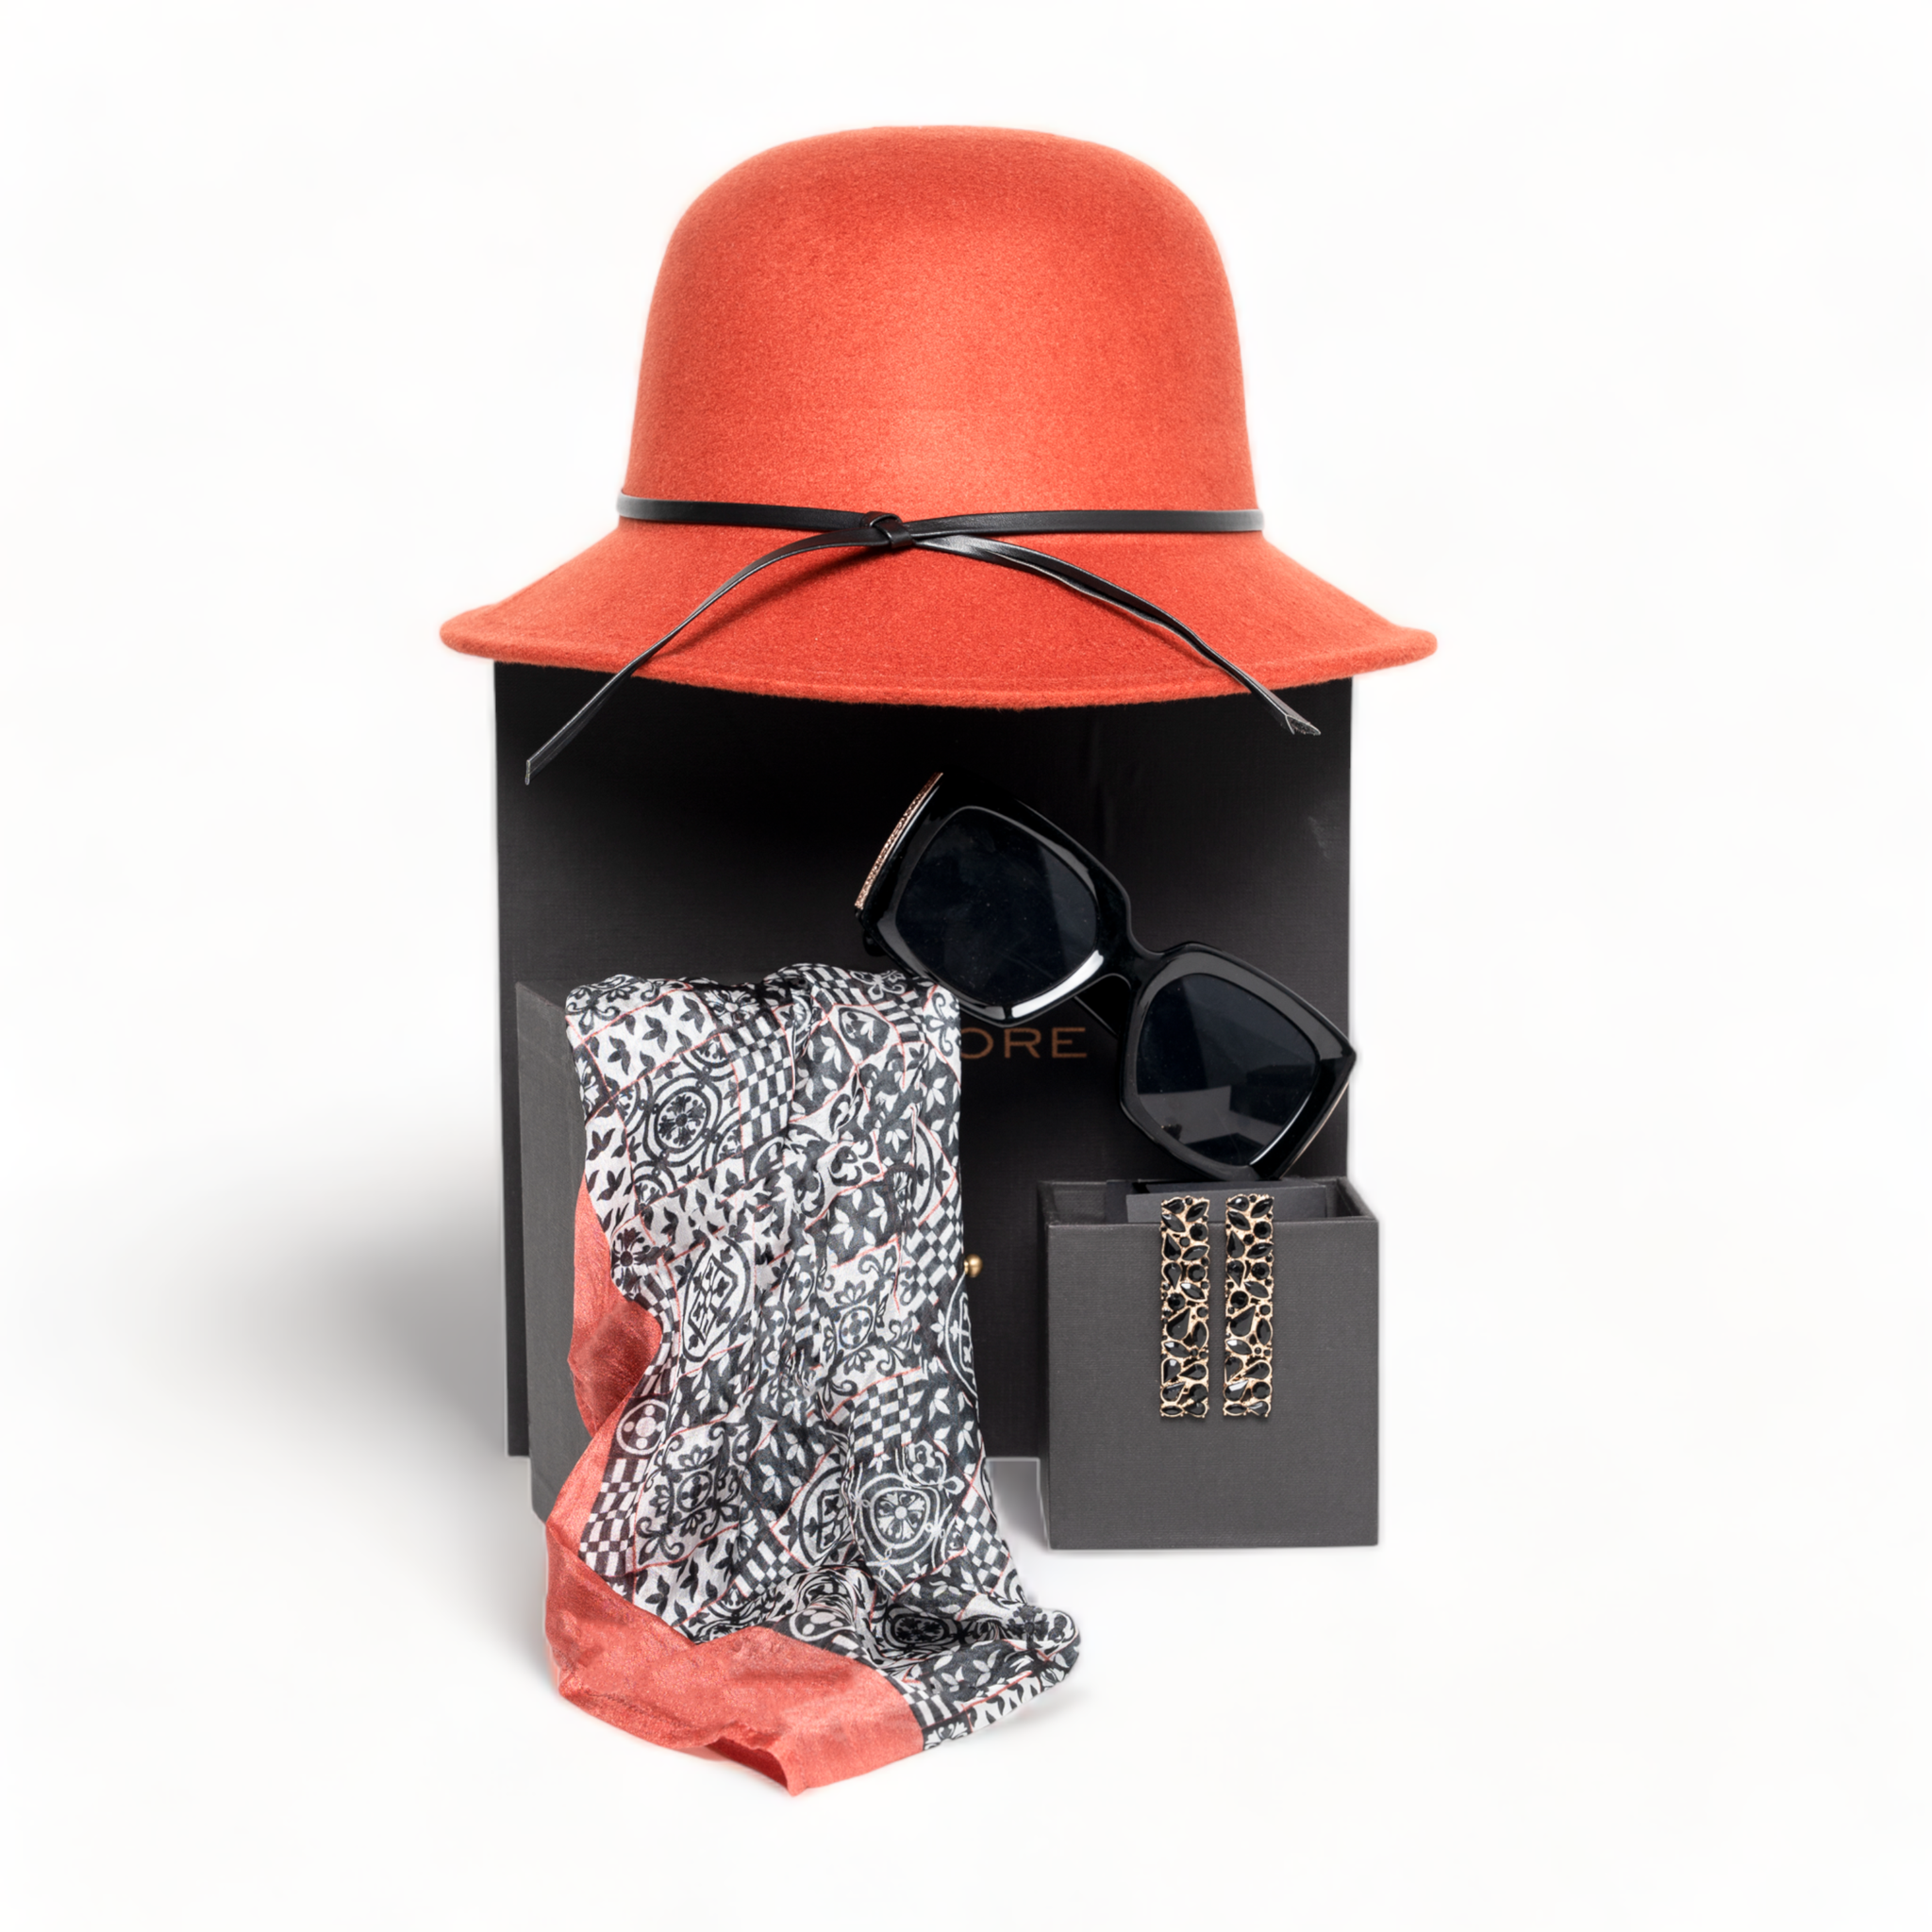 Chokore Special 3-in-1 Gift Set for Her (Red Cloche Hat, Silk Stole, & Sunglasses)